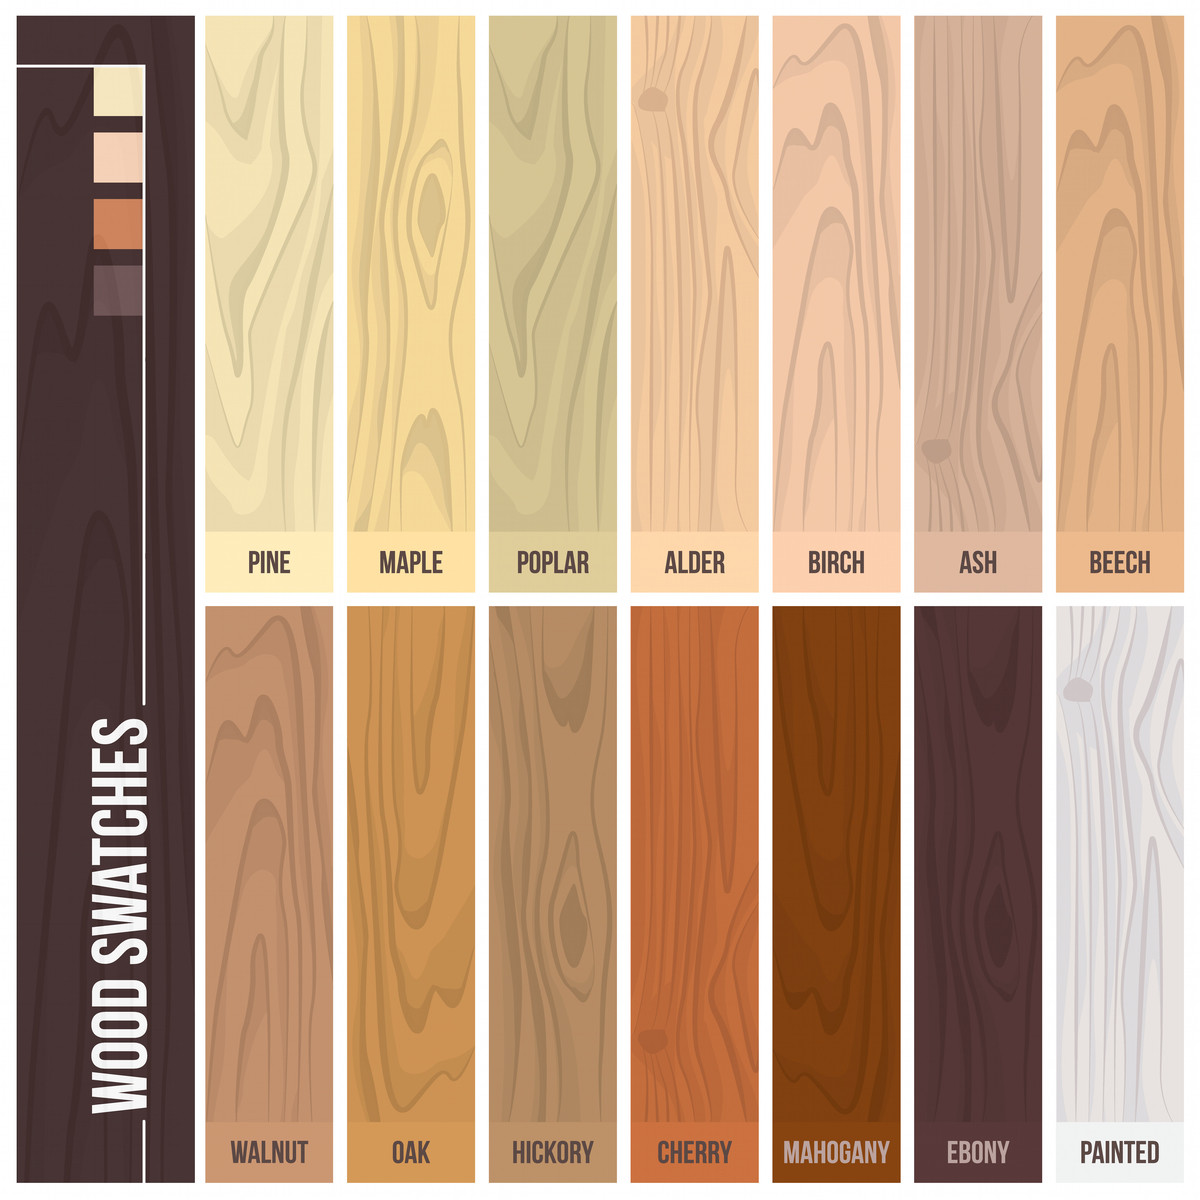 25 Nice How Much Does Restaining Hardwood Floors Cost 2022 free download how much does restaining hardwood floors cost of 12 types of hardwood flooring species styles edging dimensions throughout types of hardwood flooring illustrated guide